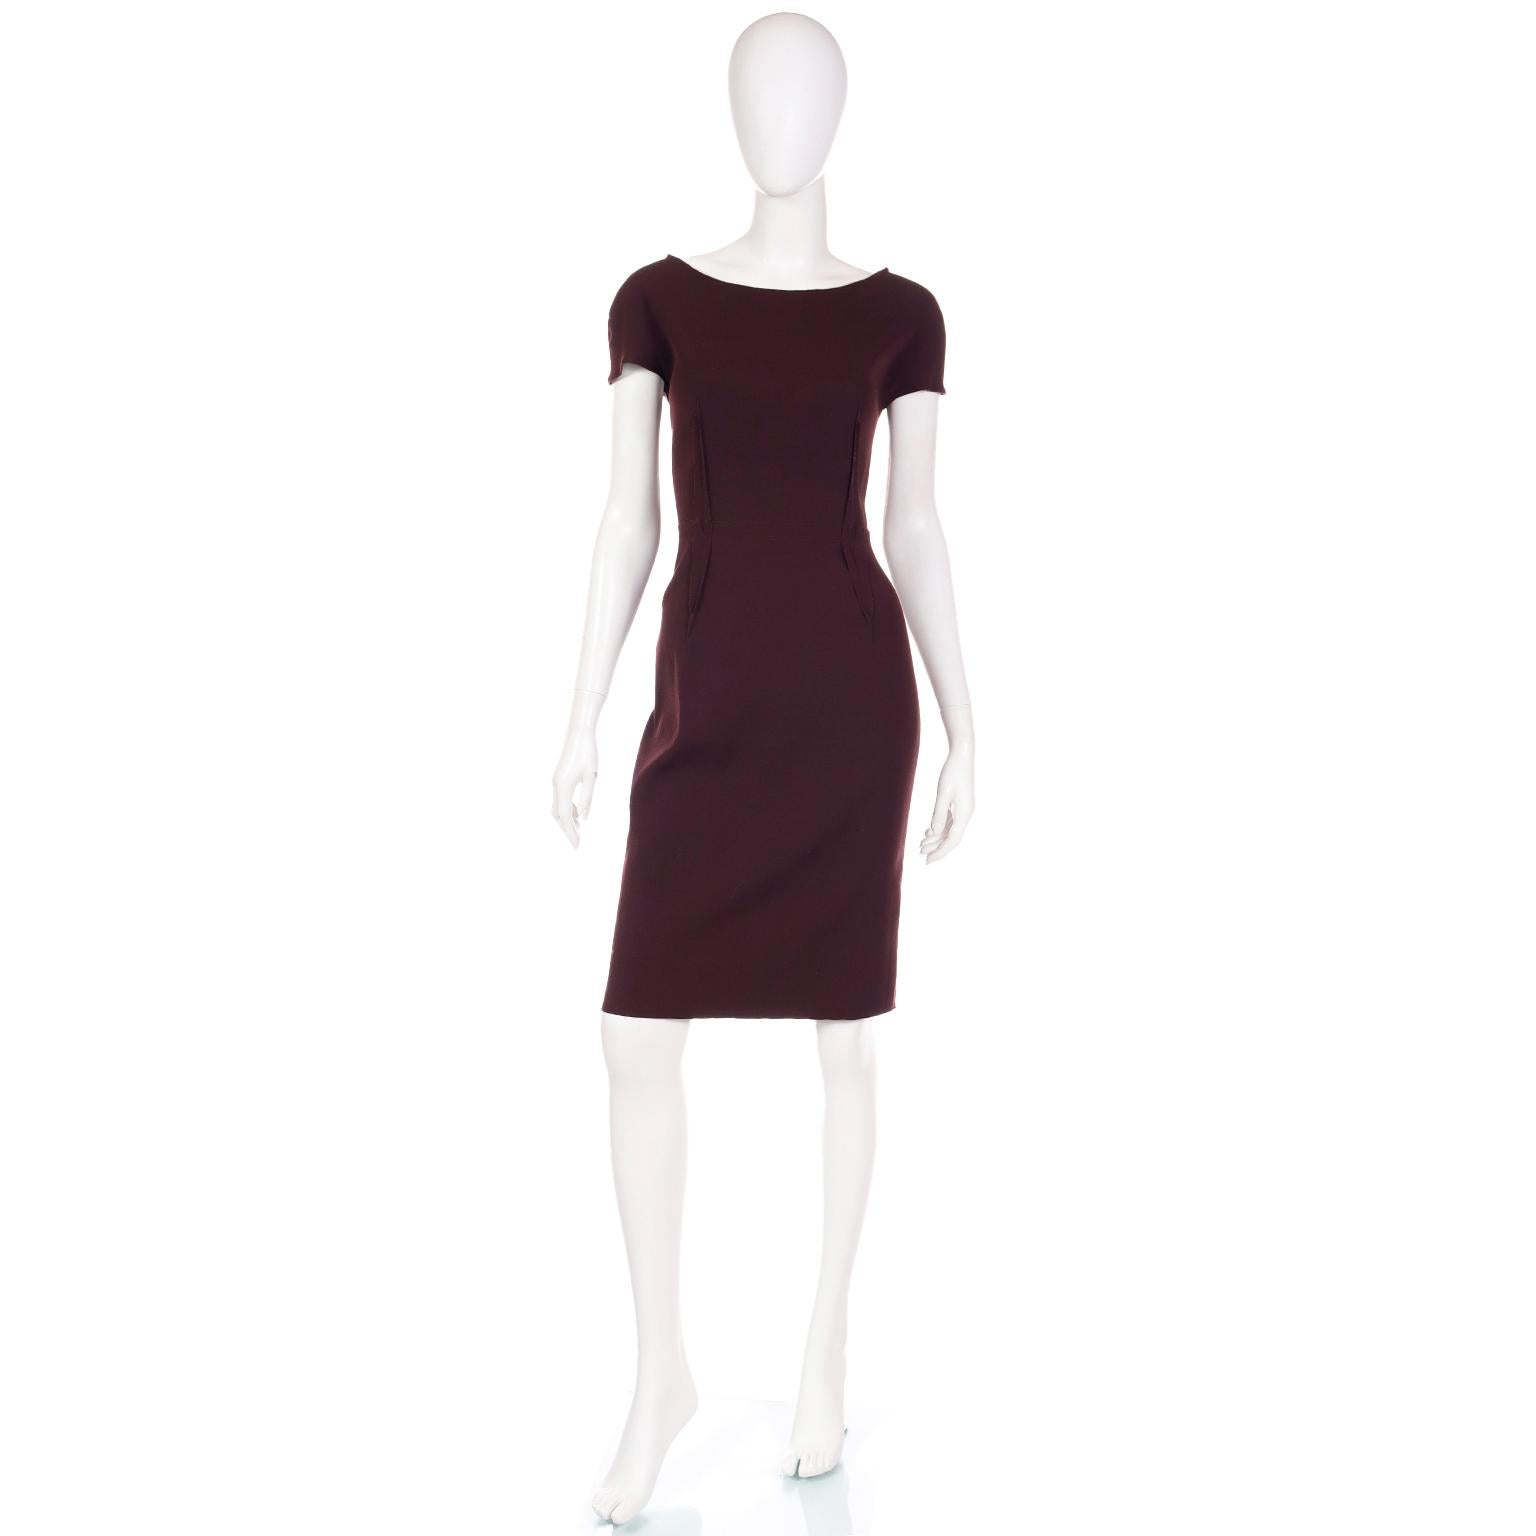 This lovely vintage Lanvin day dress was designed by Alber Elbaz for the Fall / Winter 2011 collection. We always love finding Alber Elbaz pieces and this deep plum dress features raw seams, which are a signature element of Elbaz pieces. 
Made in